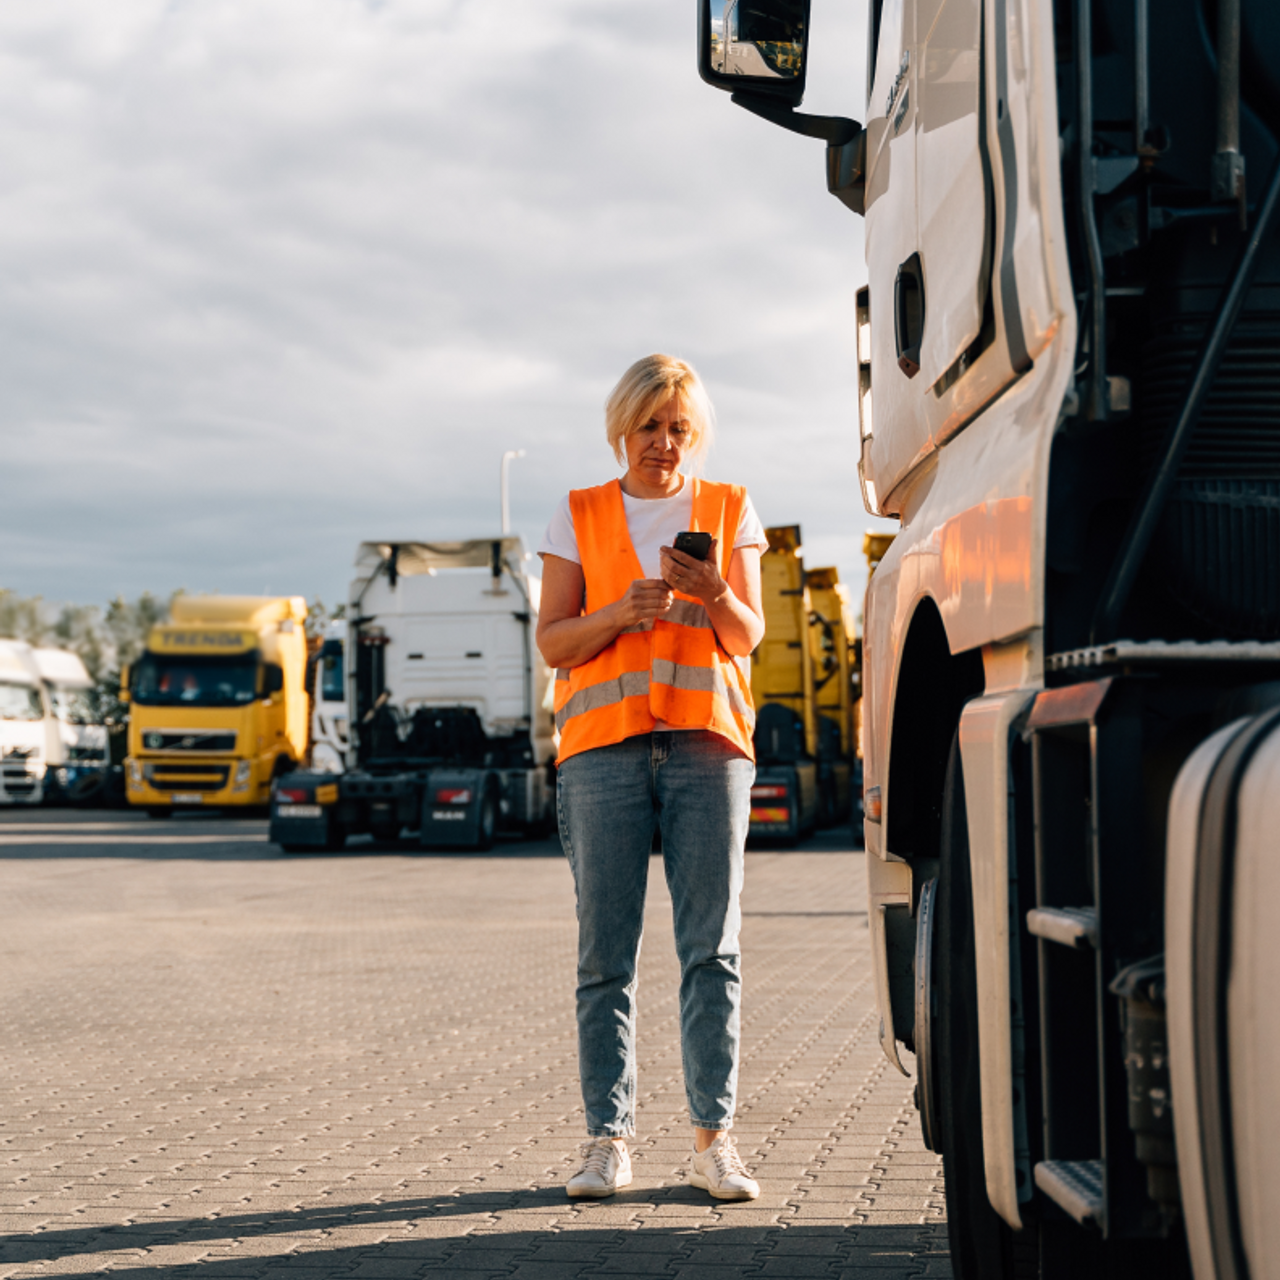 Female logistics worker in safety vest checking her phone at a busy trucking yard.